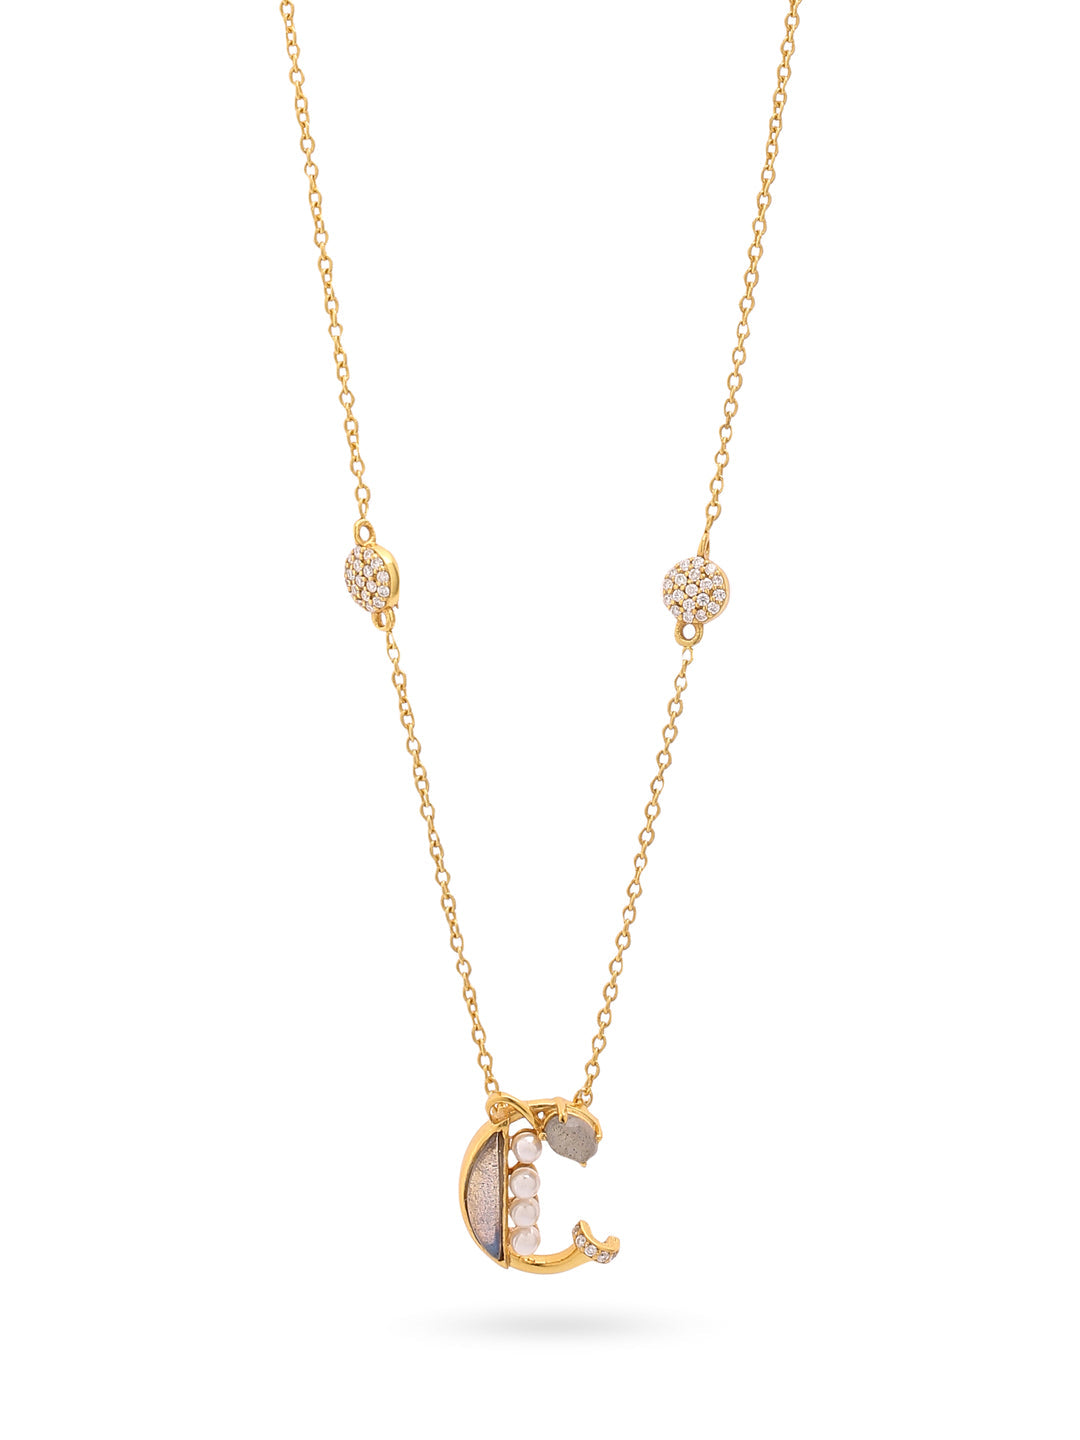 Gold-Plated Alphabet Pendant with Gem Accents